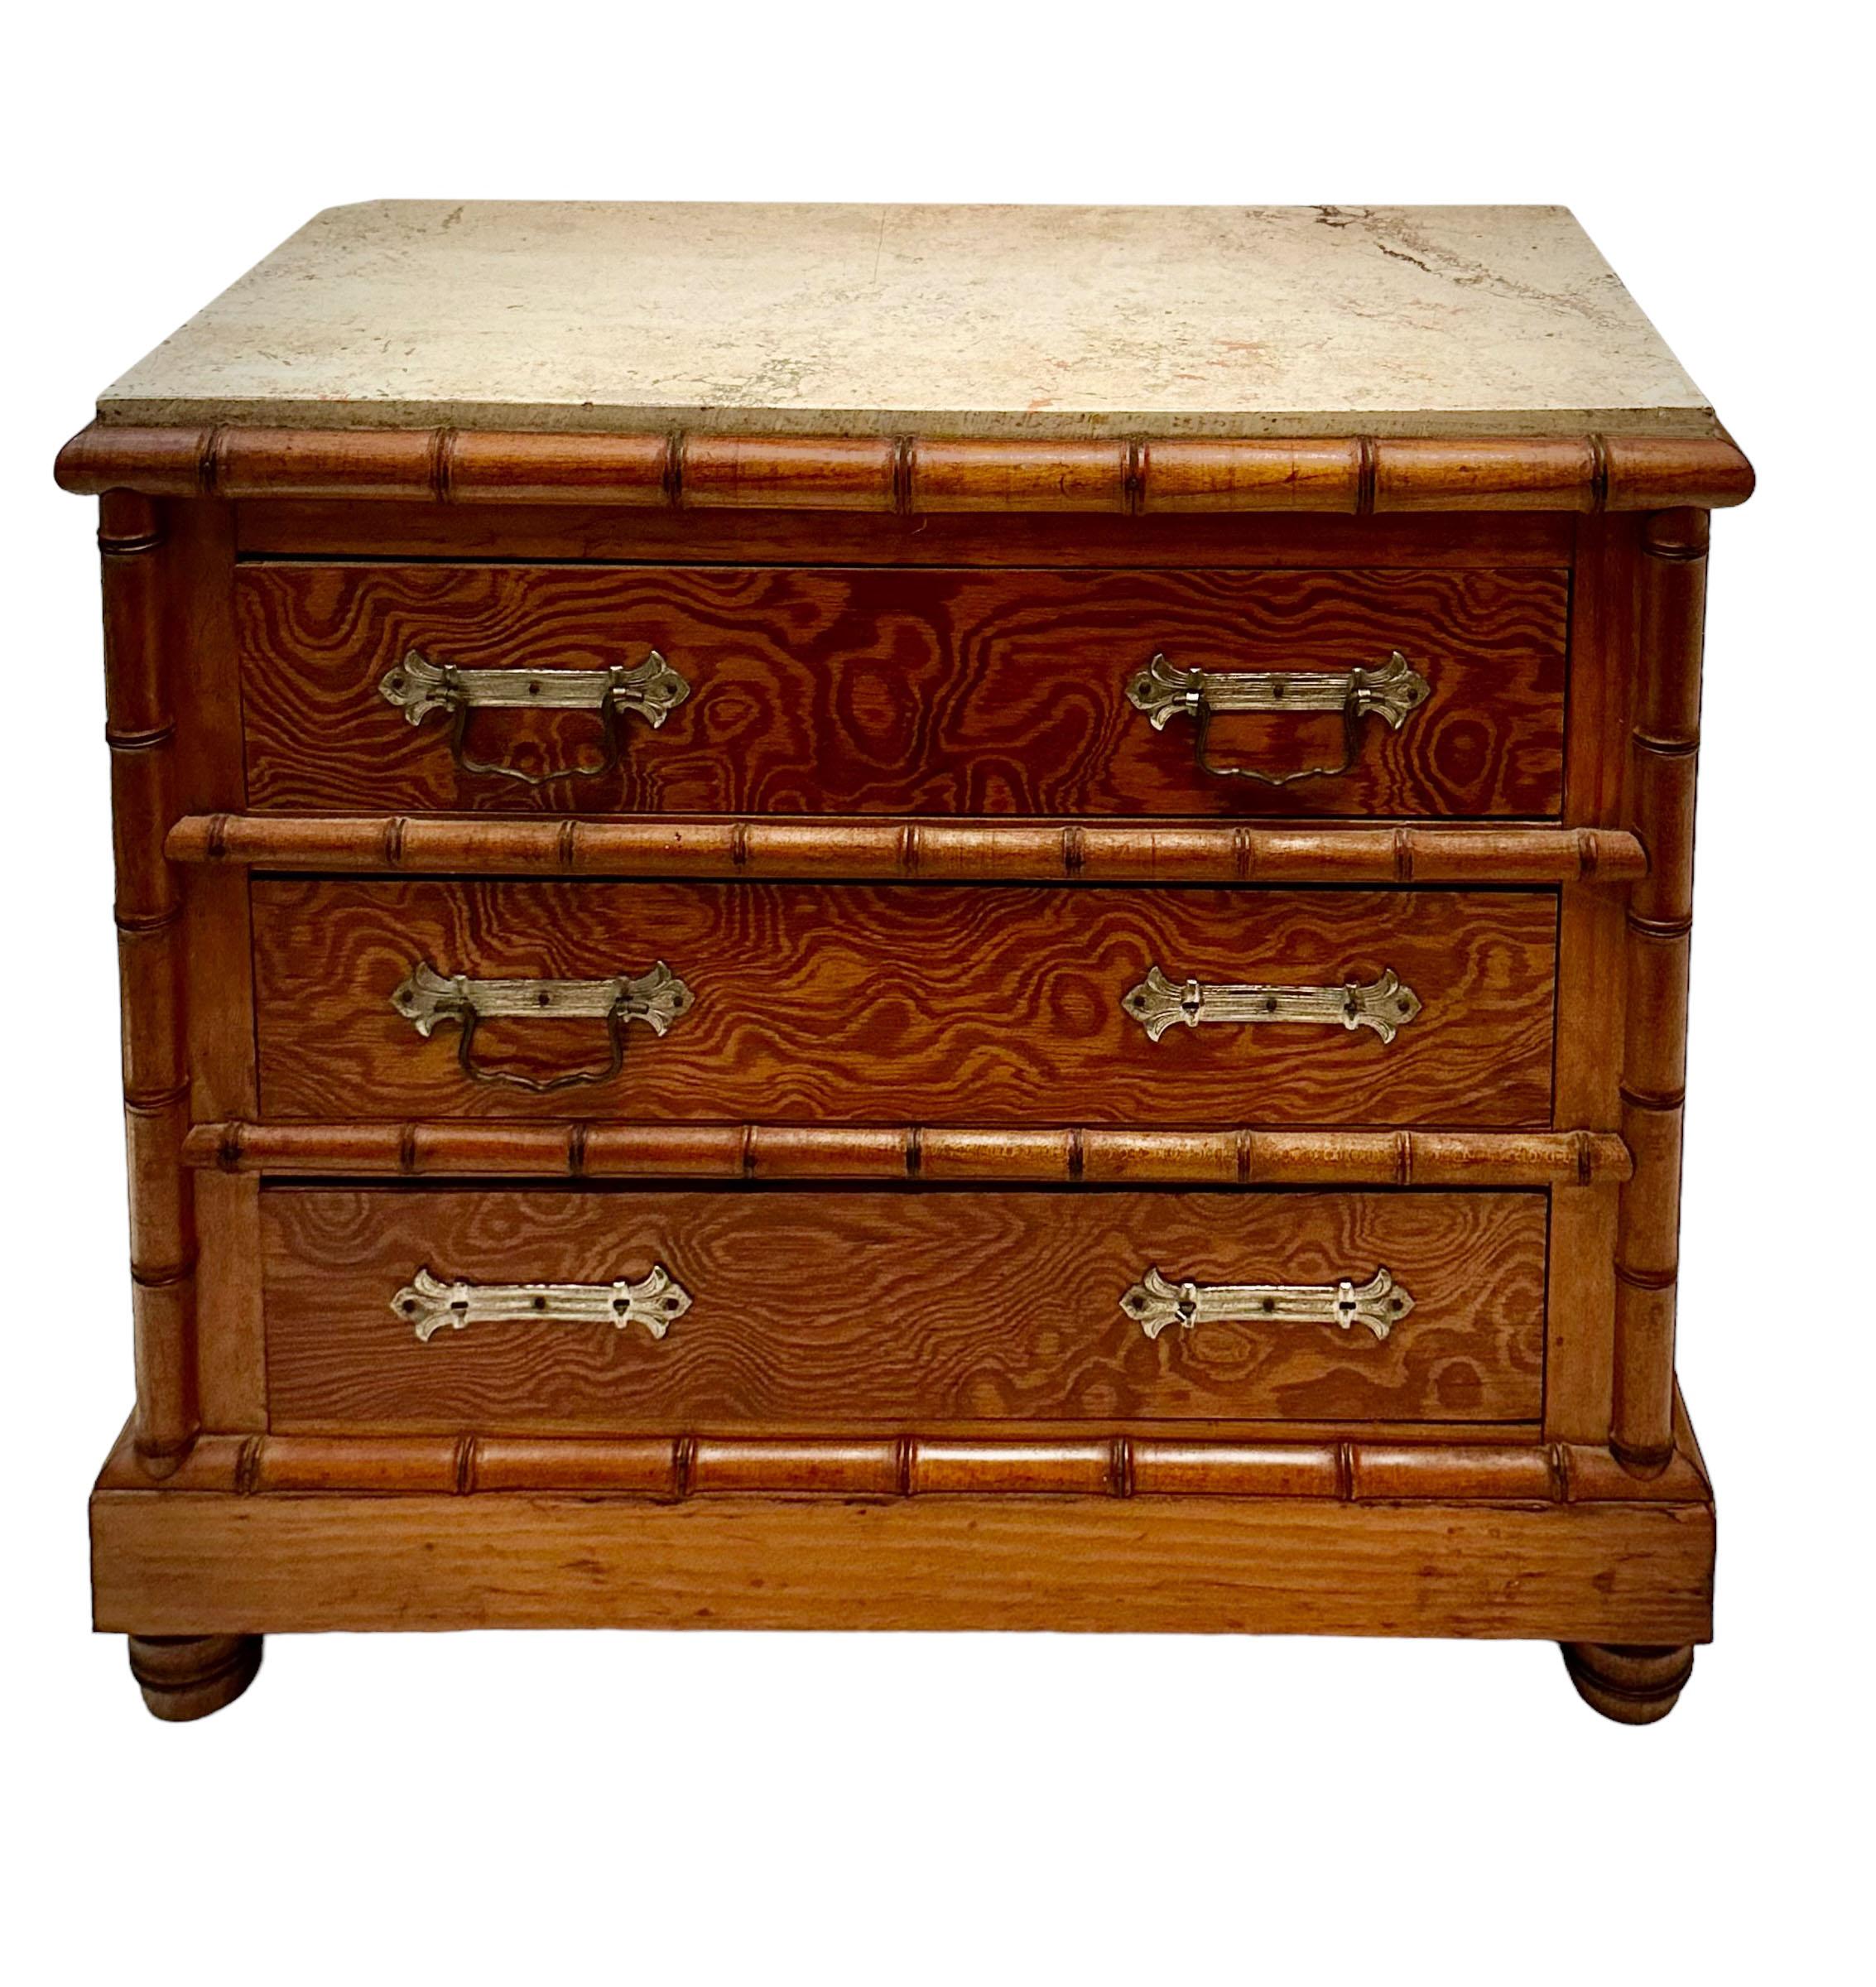 A turn of the century French salesman's sample of a chest in the bamboo style with a marble top. Circa 1900 to 1915. Three handles missing. 